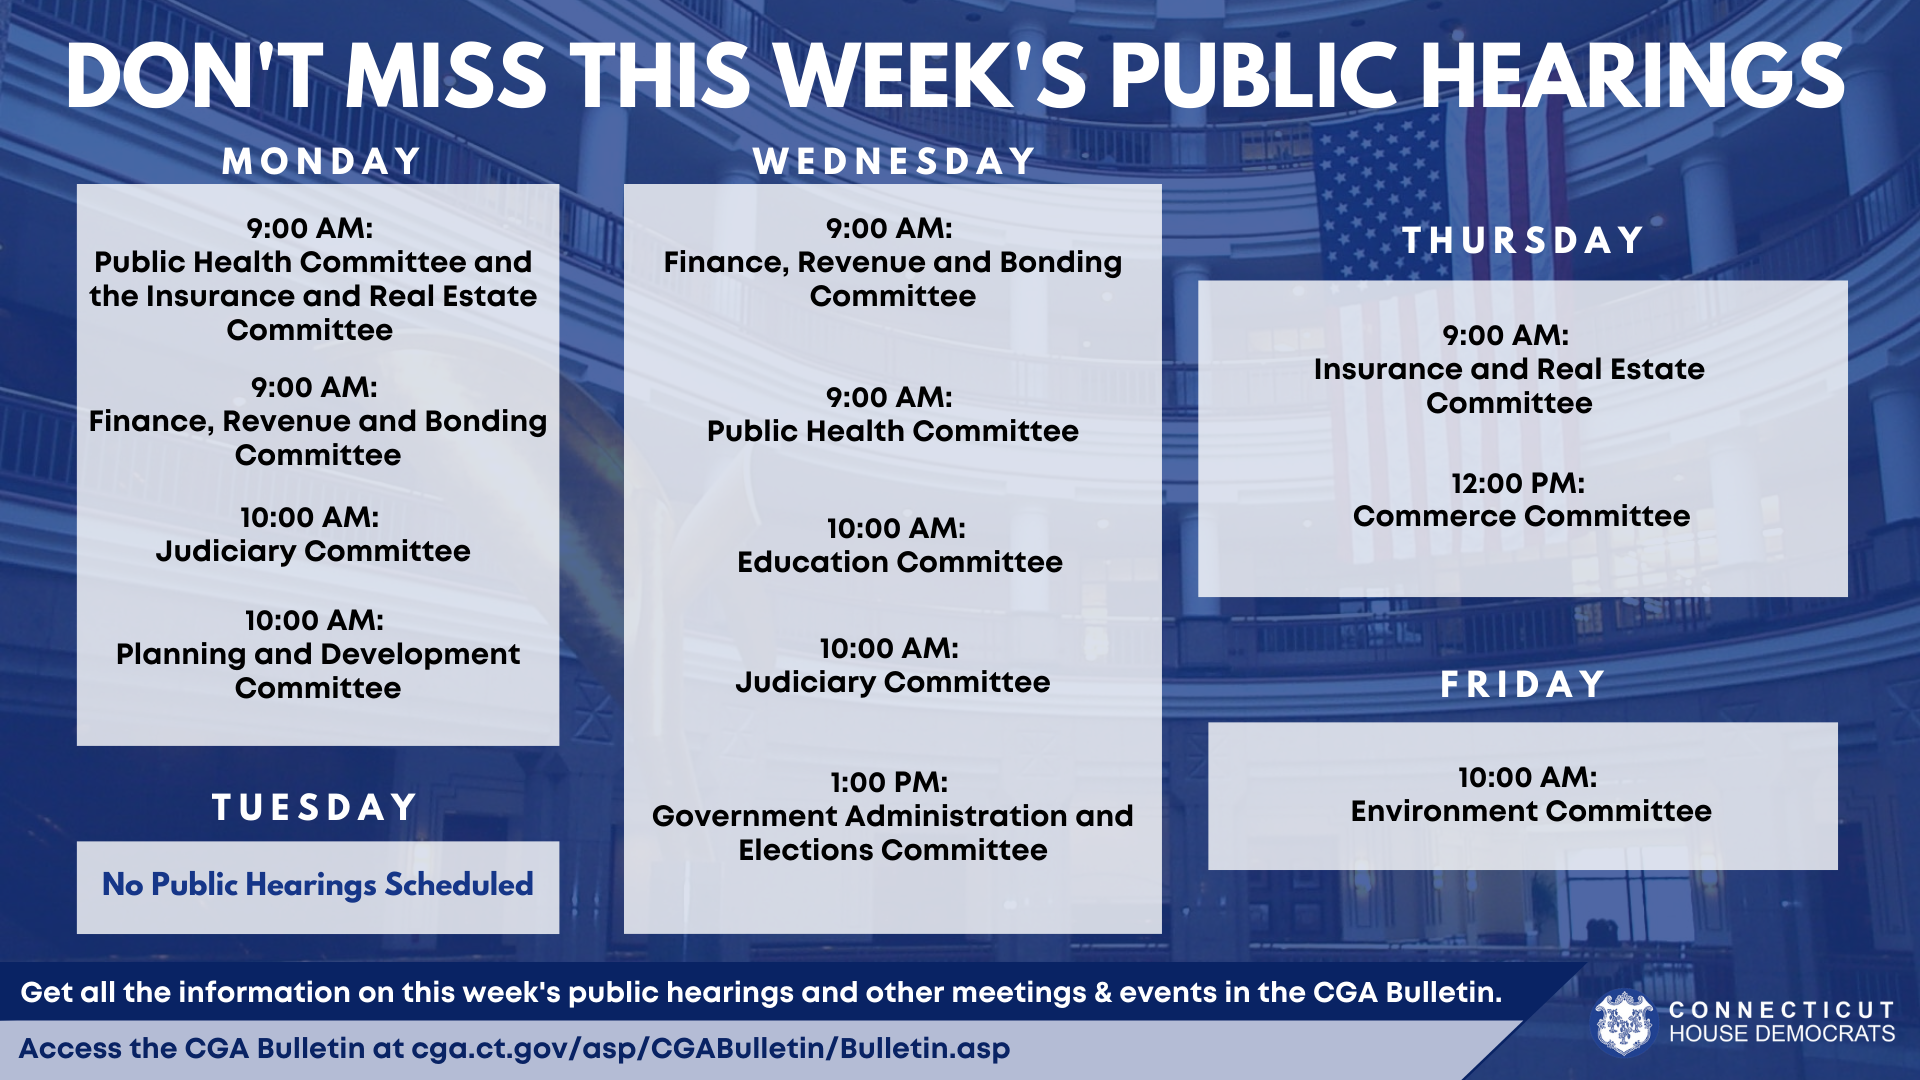 March 12th Public Hearings Schedule